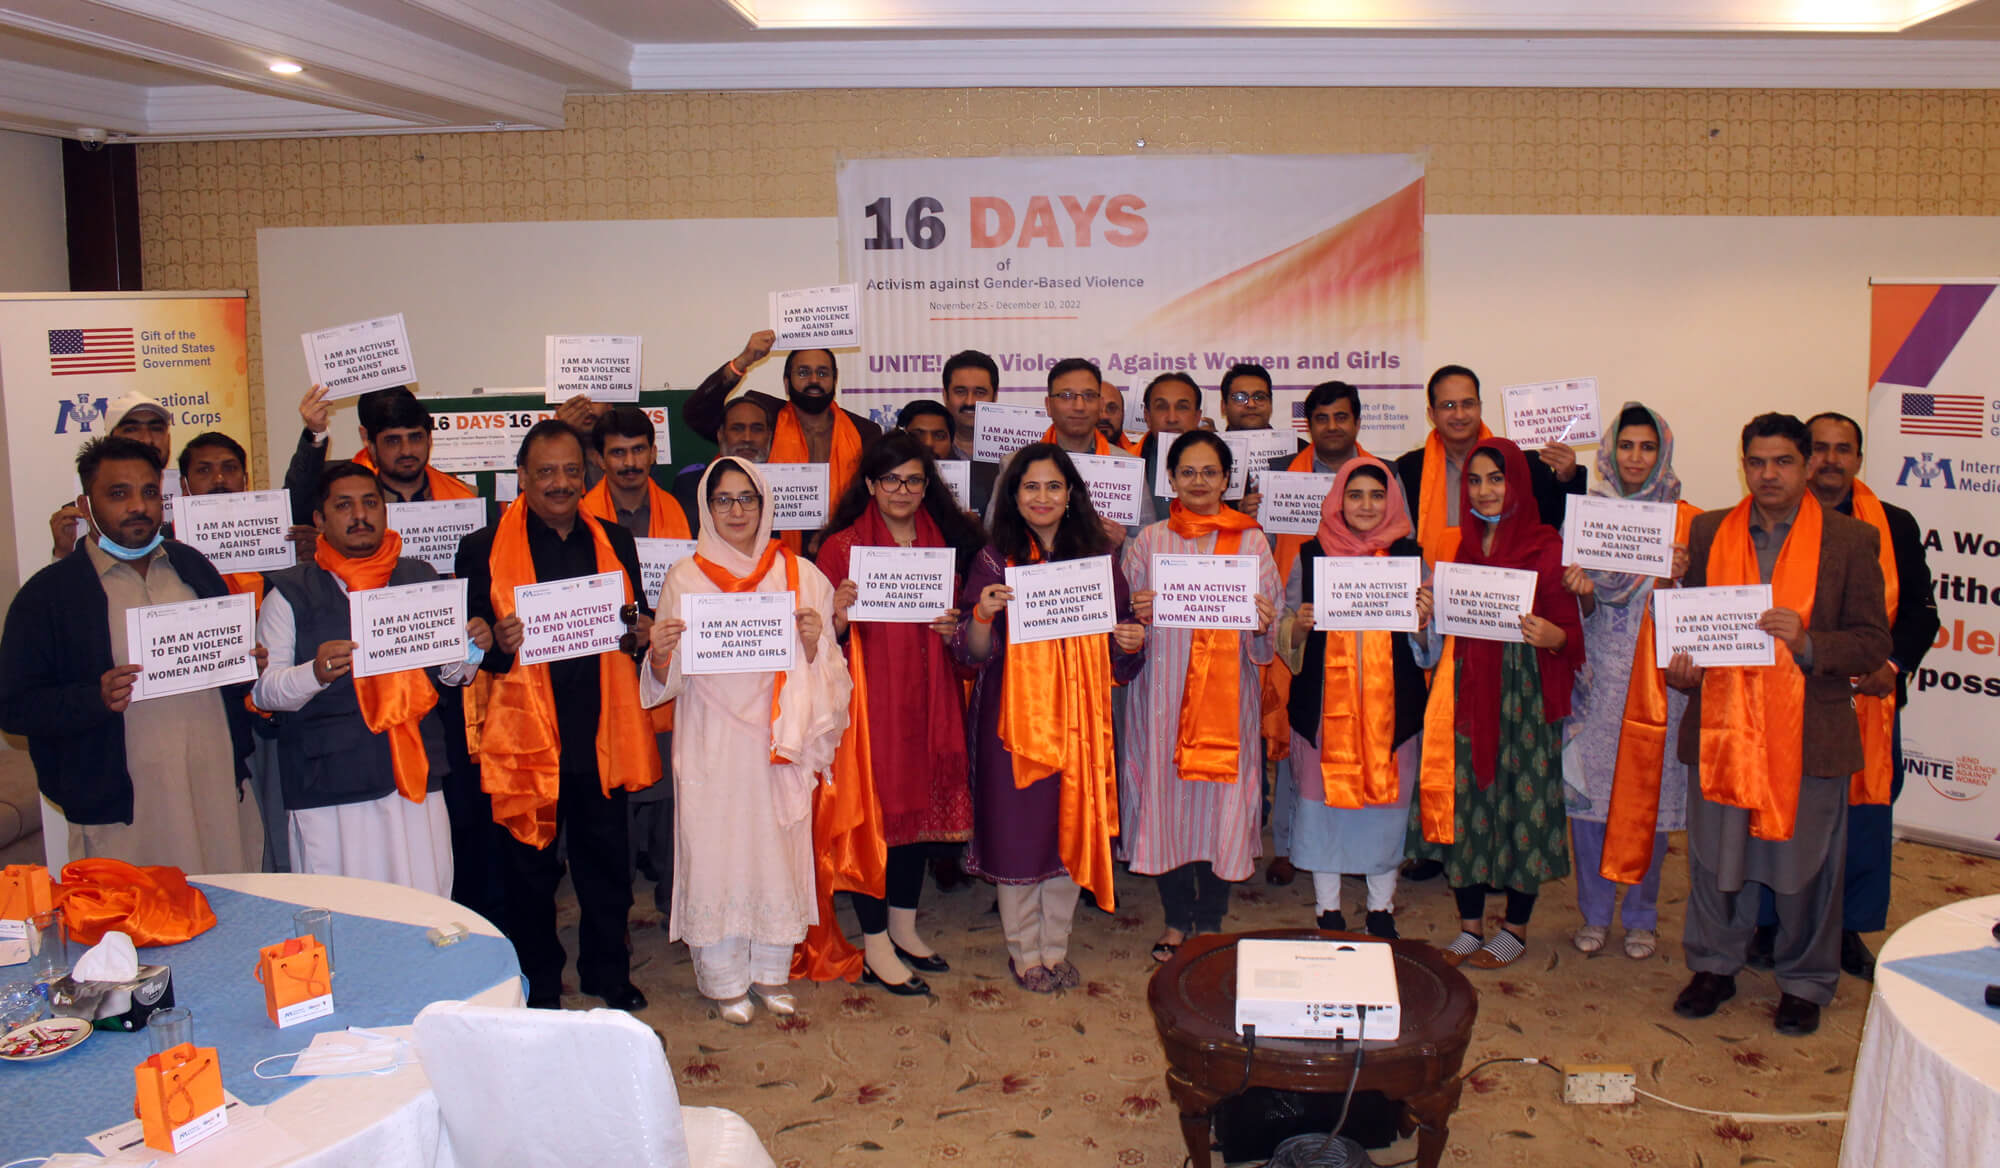 Participants in our events in Chakdara, Pakistan, shared pledges, gave presentations about the challenges they face in implementing GBV activities and discussed how to overcome those challenges.